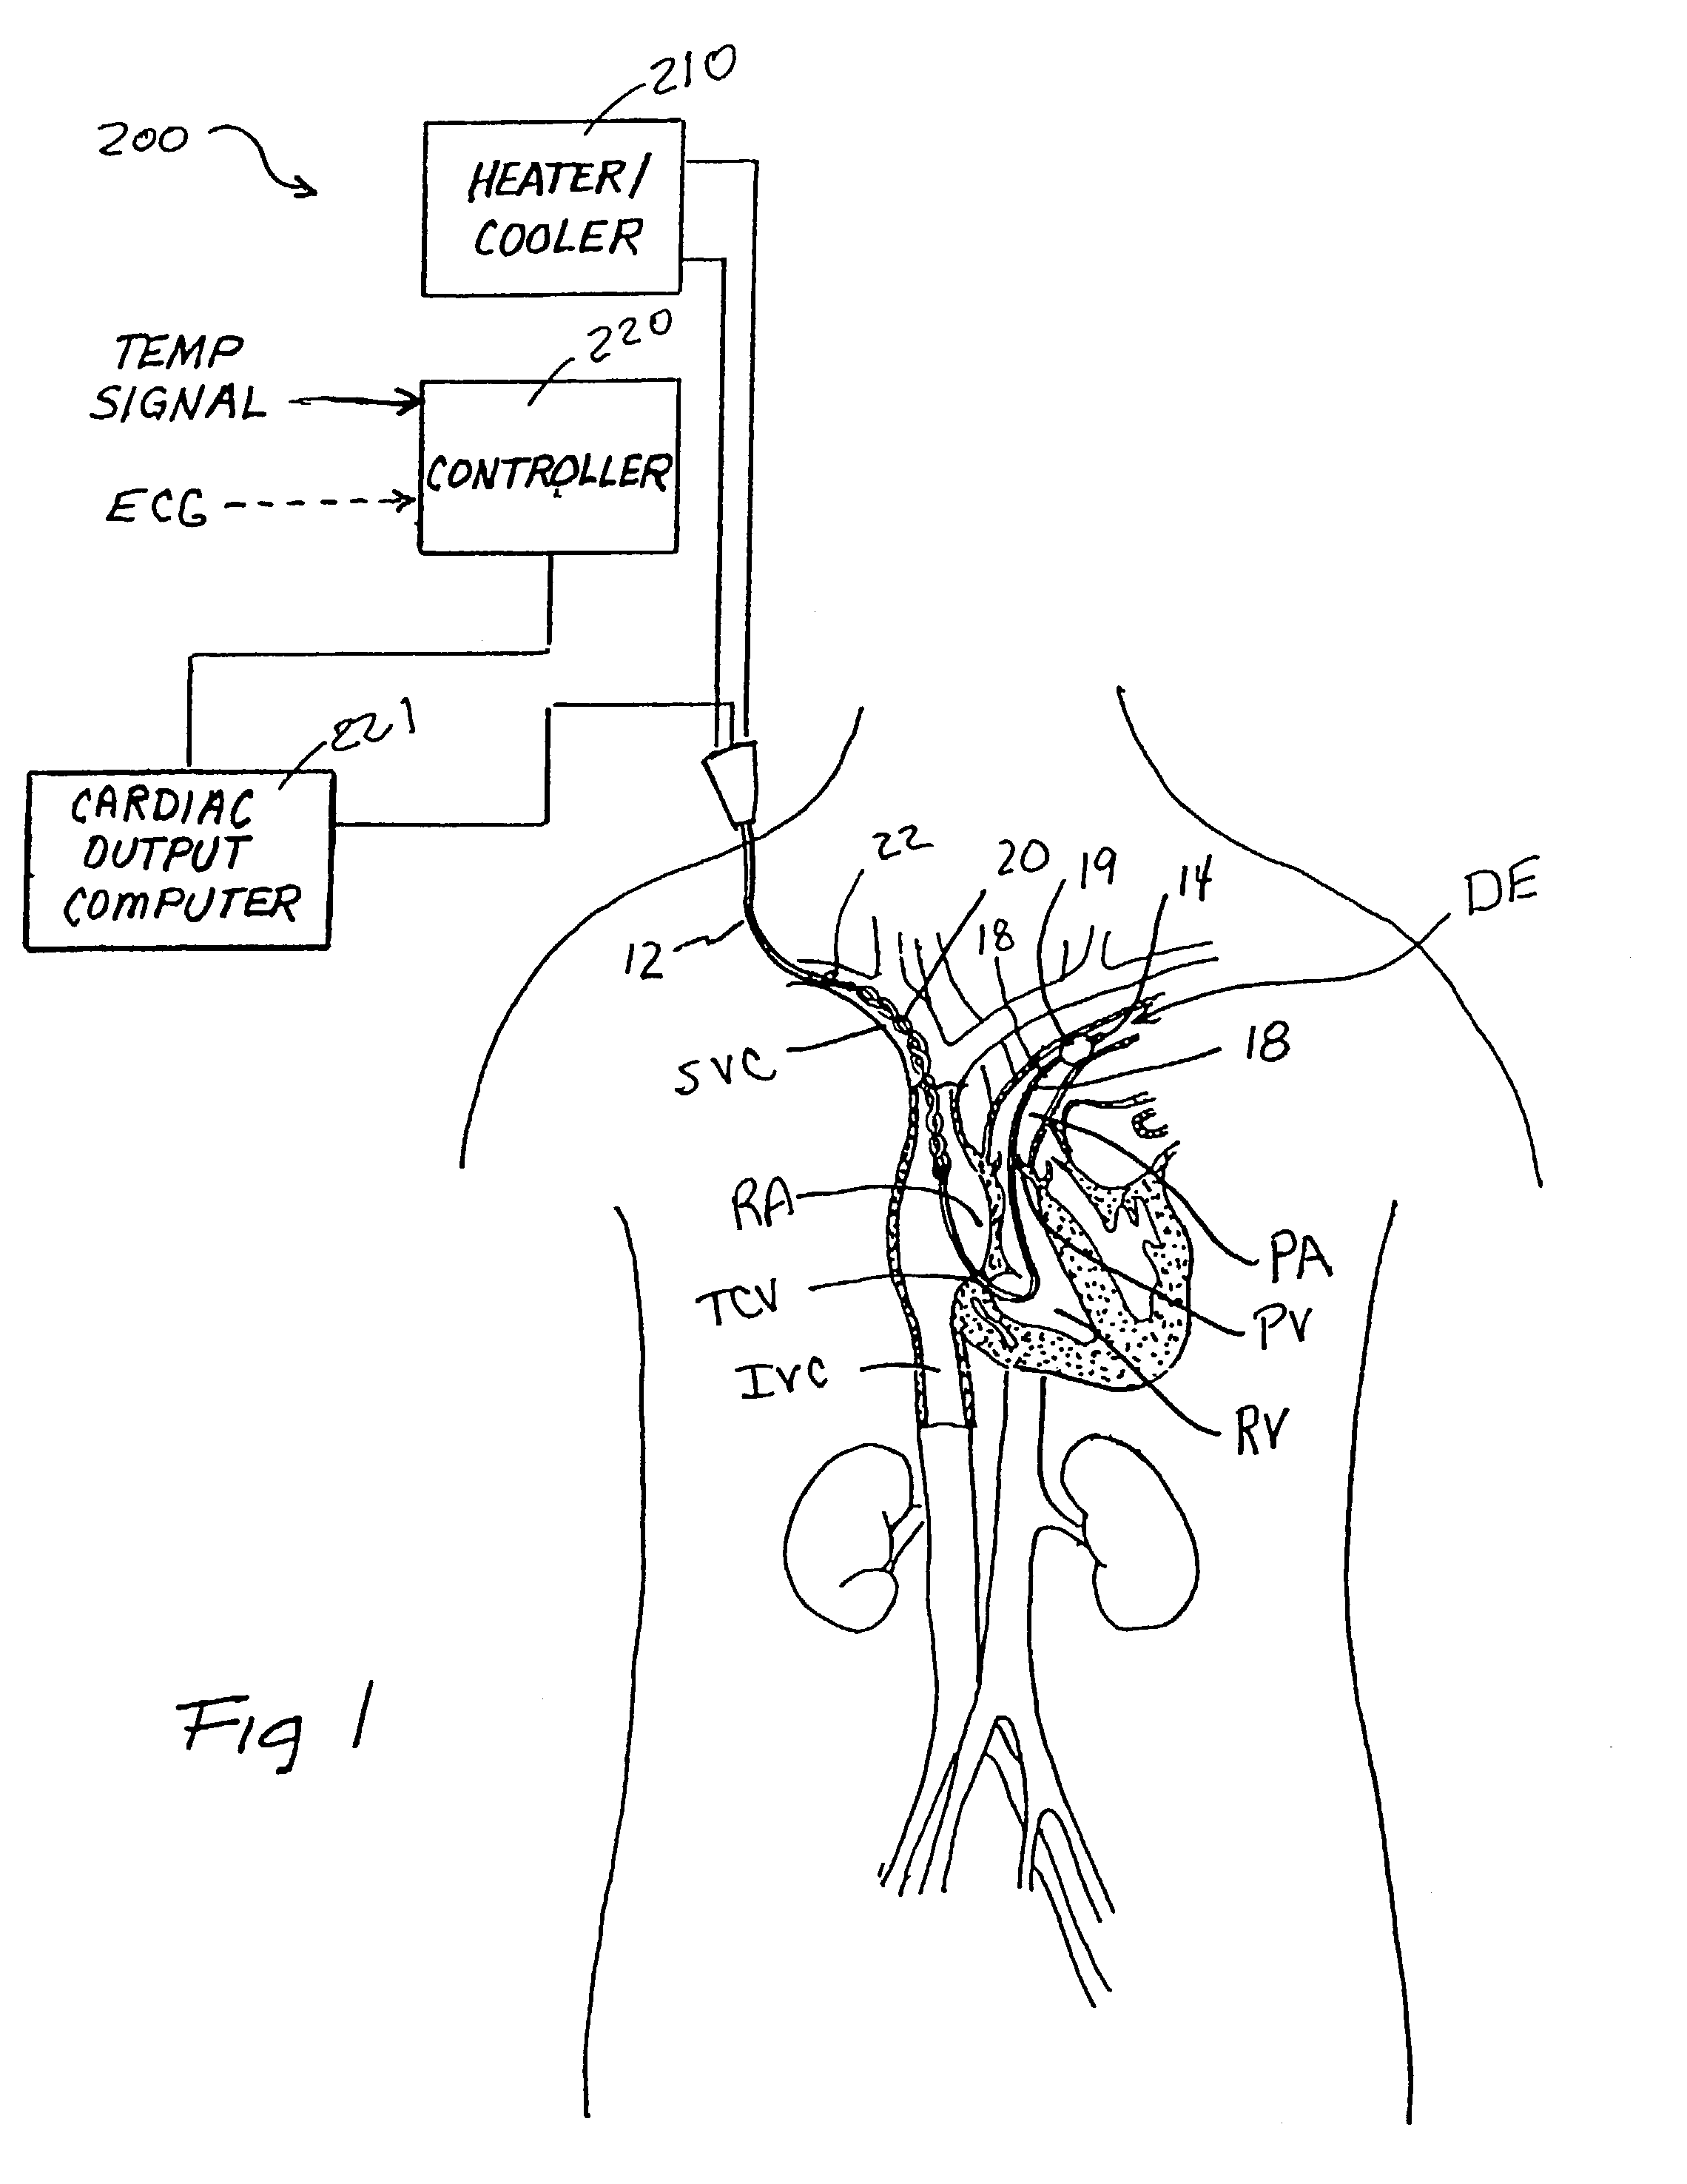 Devices and methods for measuring blood flow rate or cardiac output and for heating or cooling the body